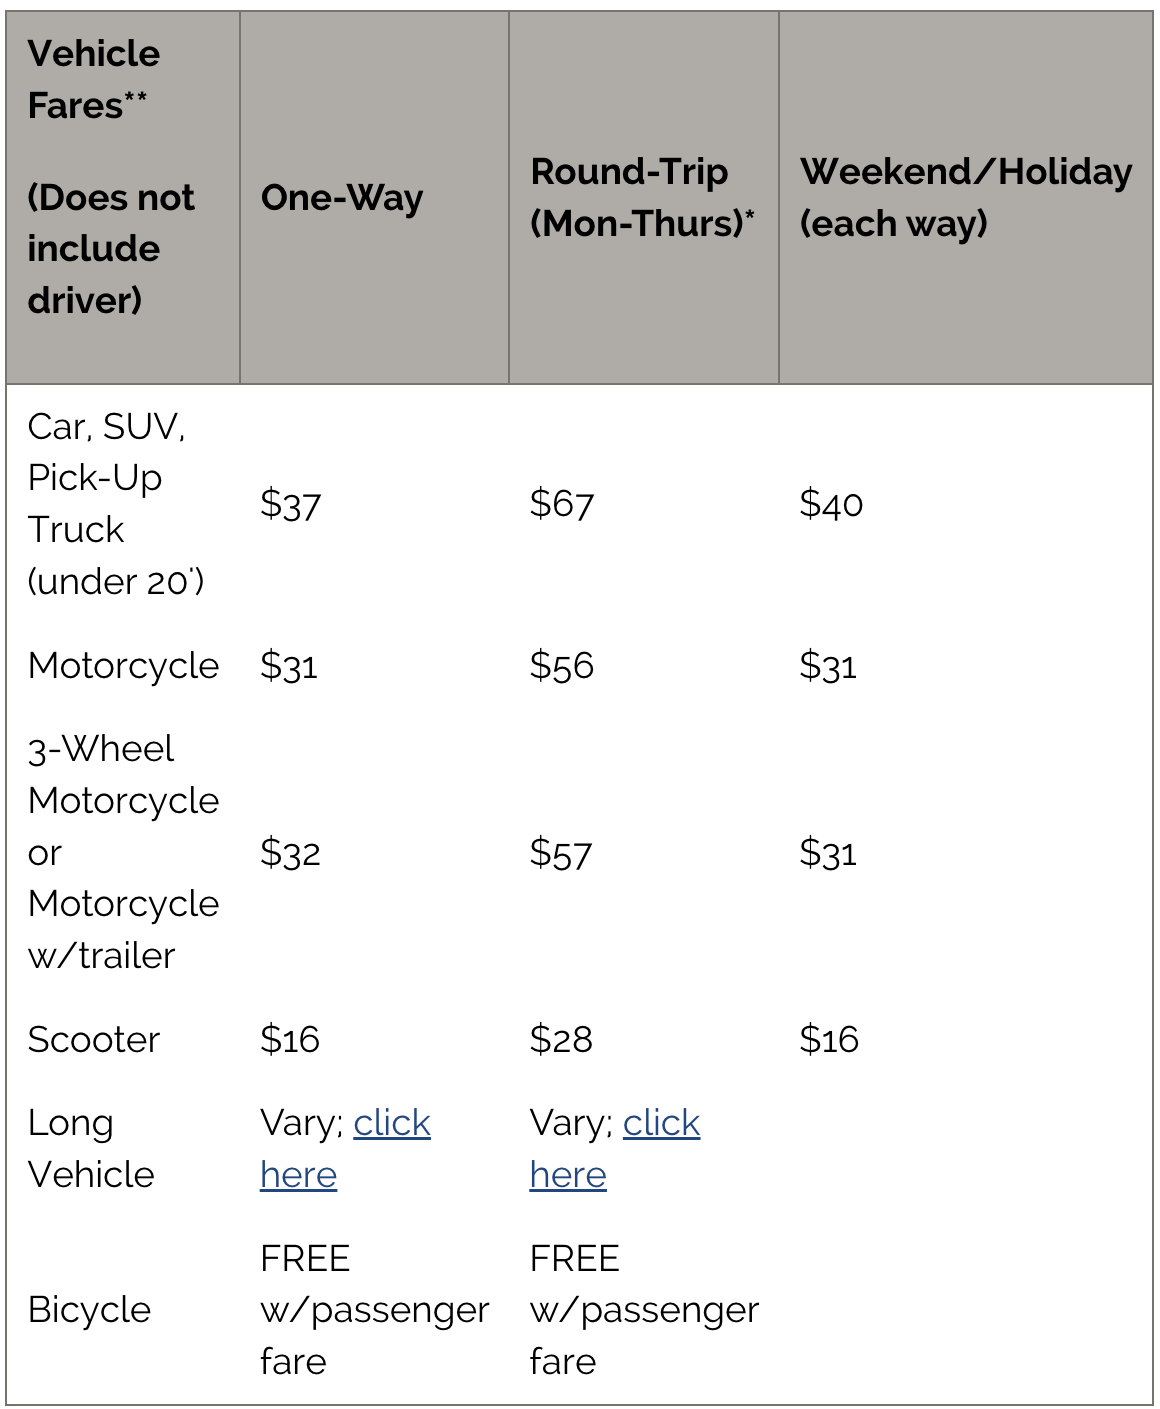 list of fares for vehicles